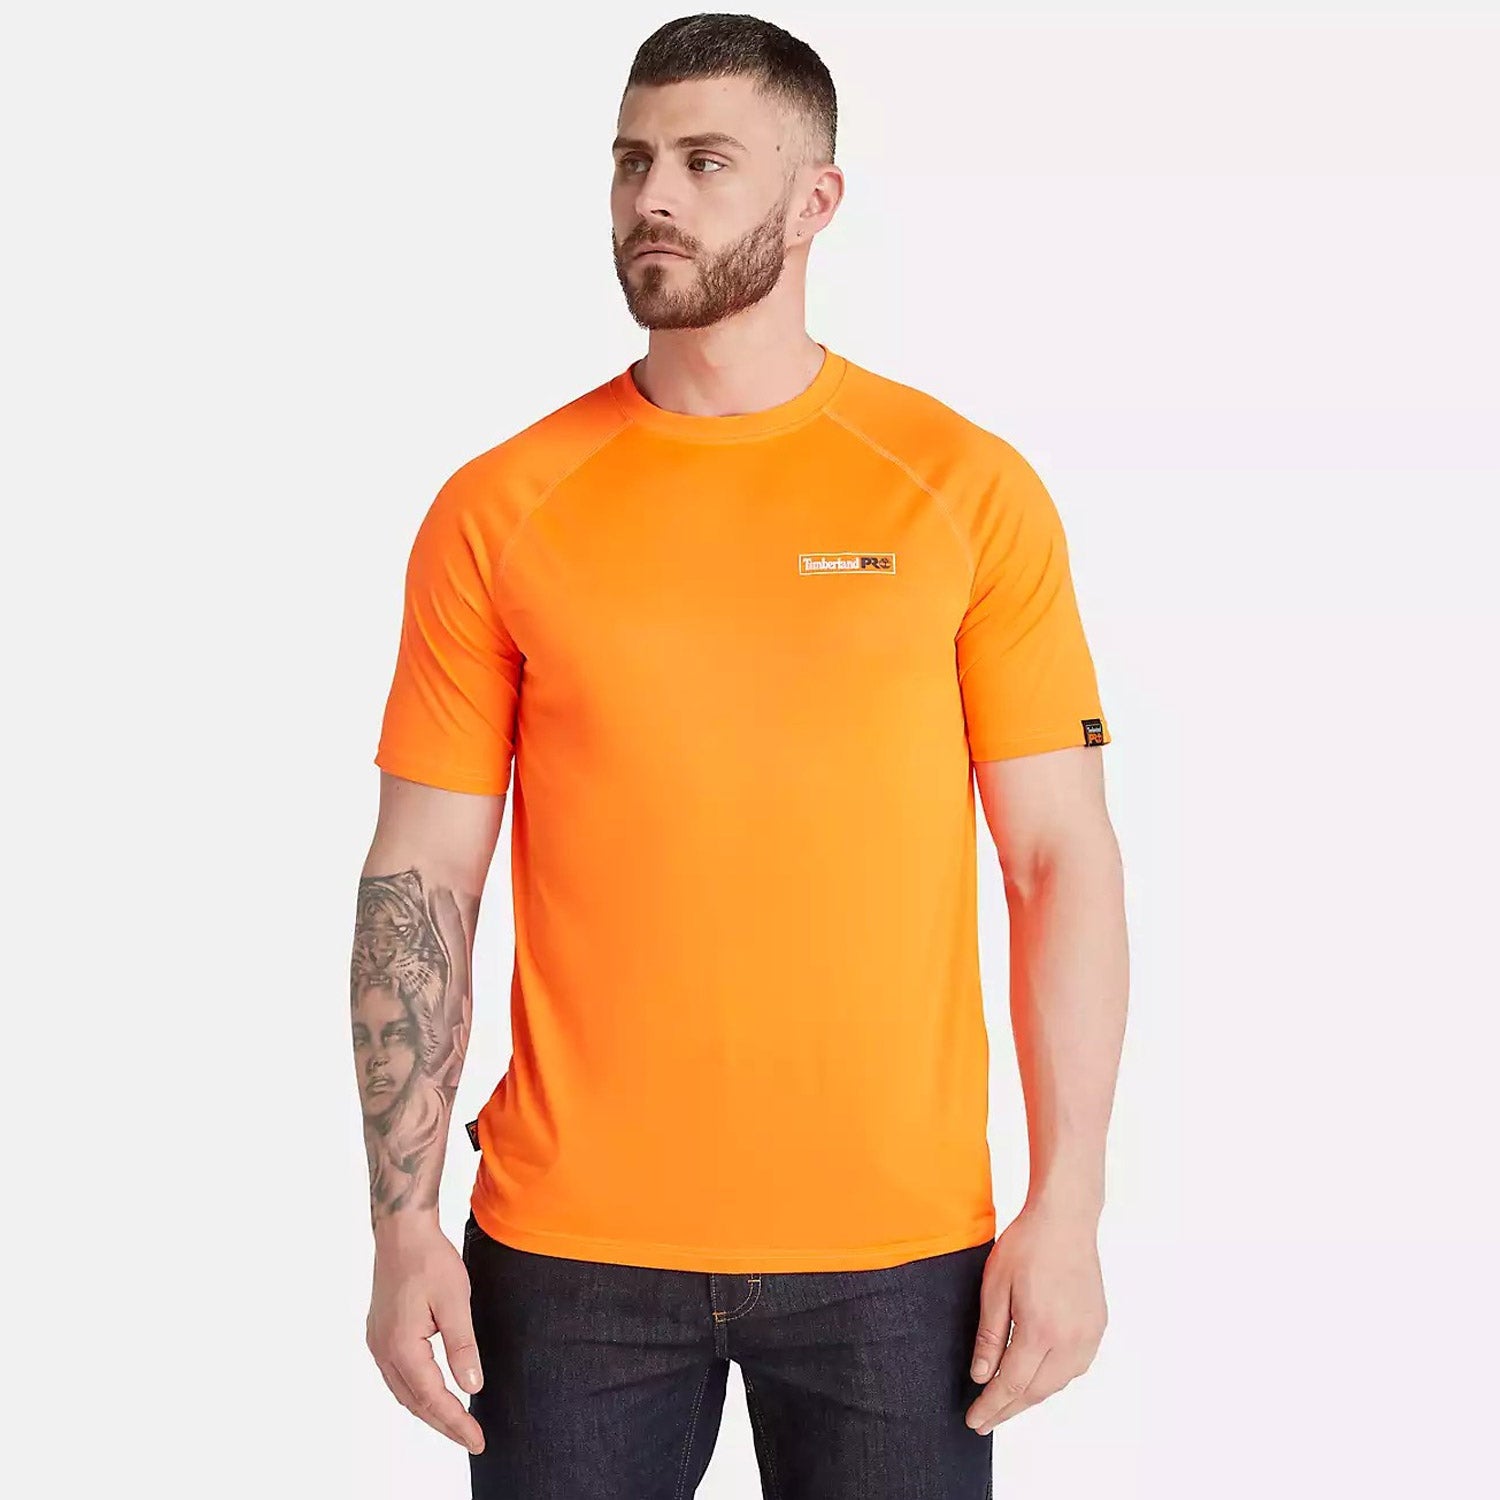 Timberland PRO Wicking Good Athletic-Fit SS T-Shirt - Work World - Workwear, Work Boots, Safety Gear